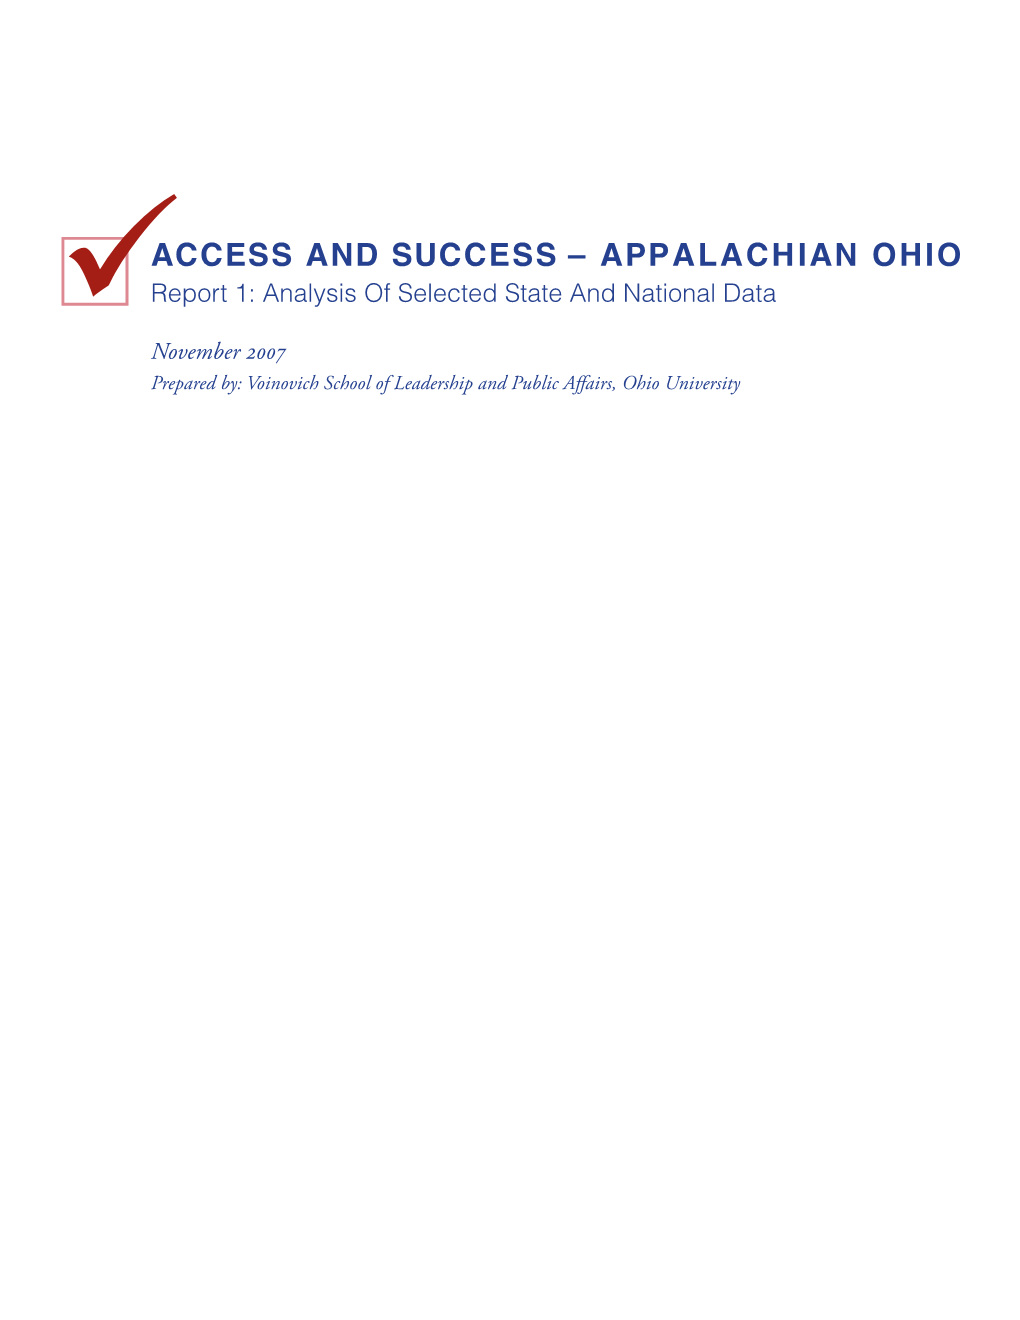 Appalachian Ohio Report 1: Analysis of Selected State and National Data